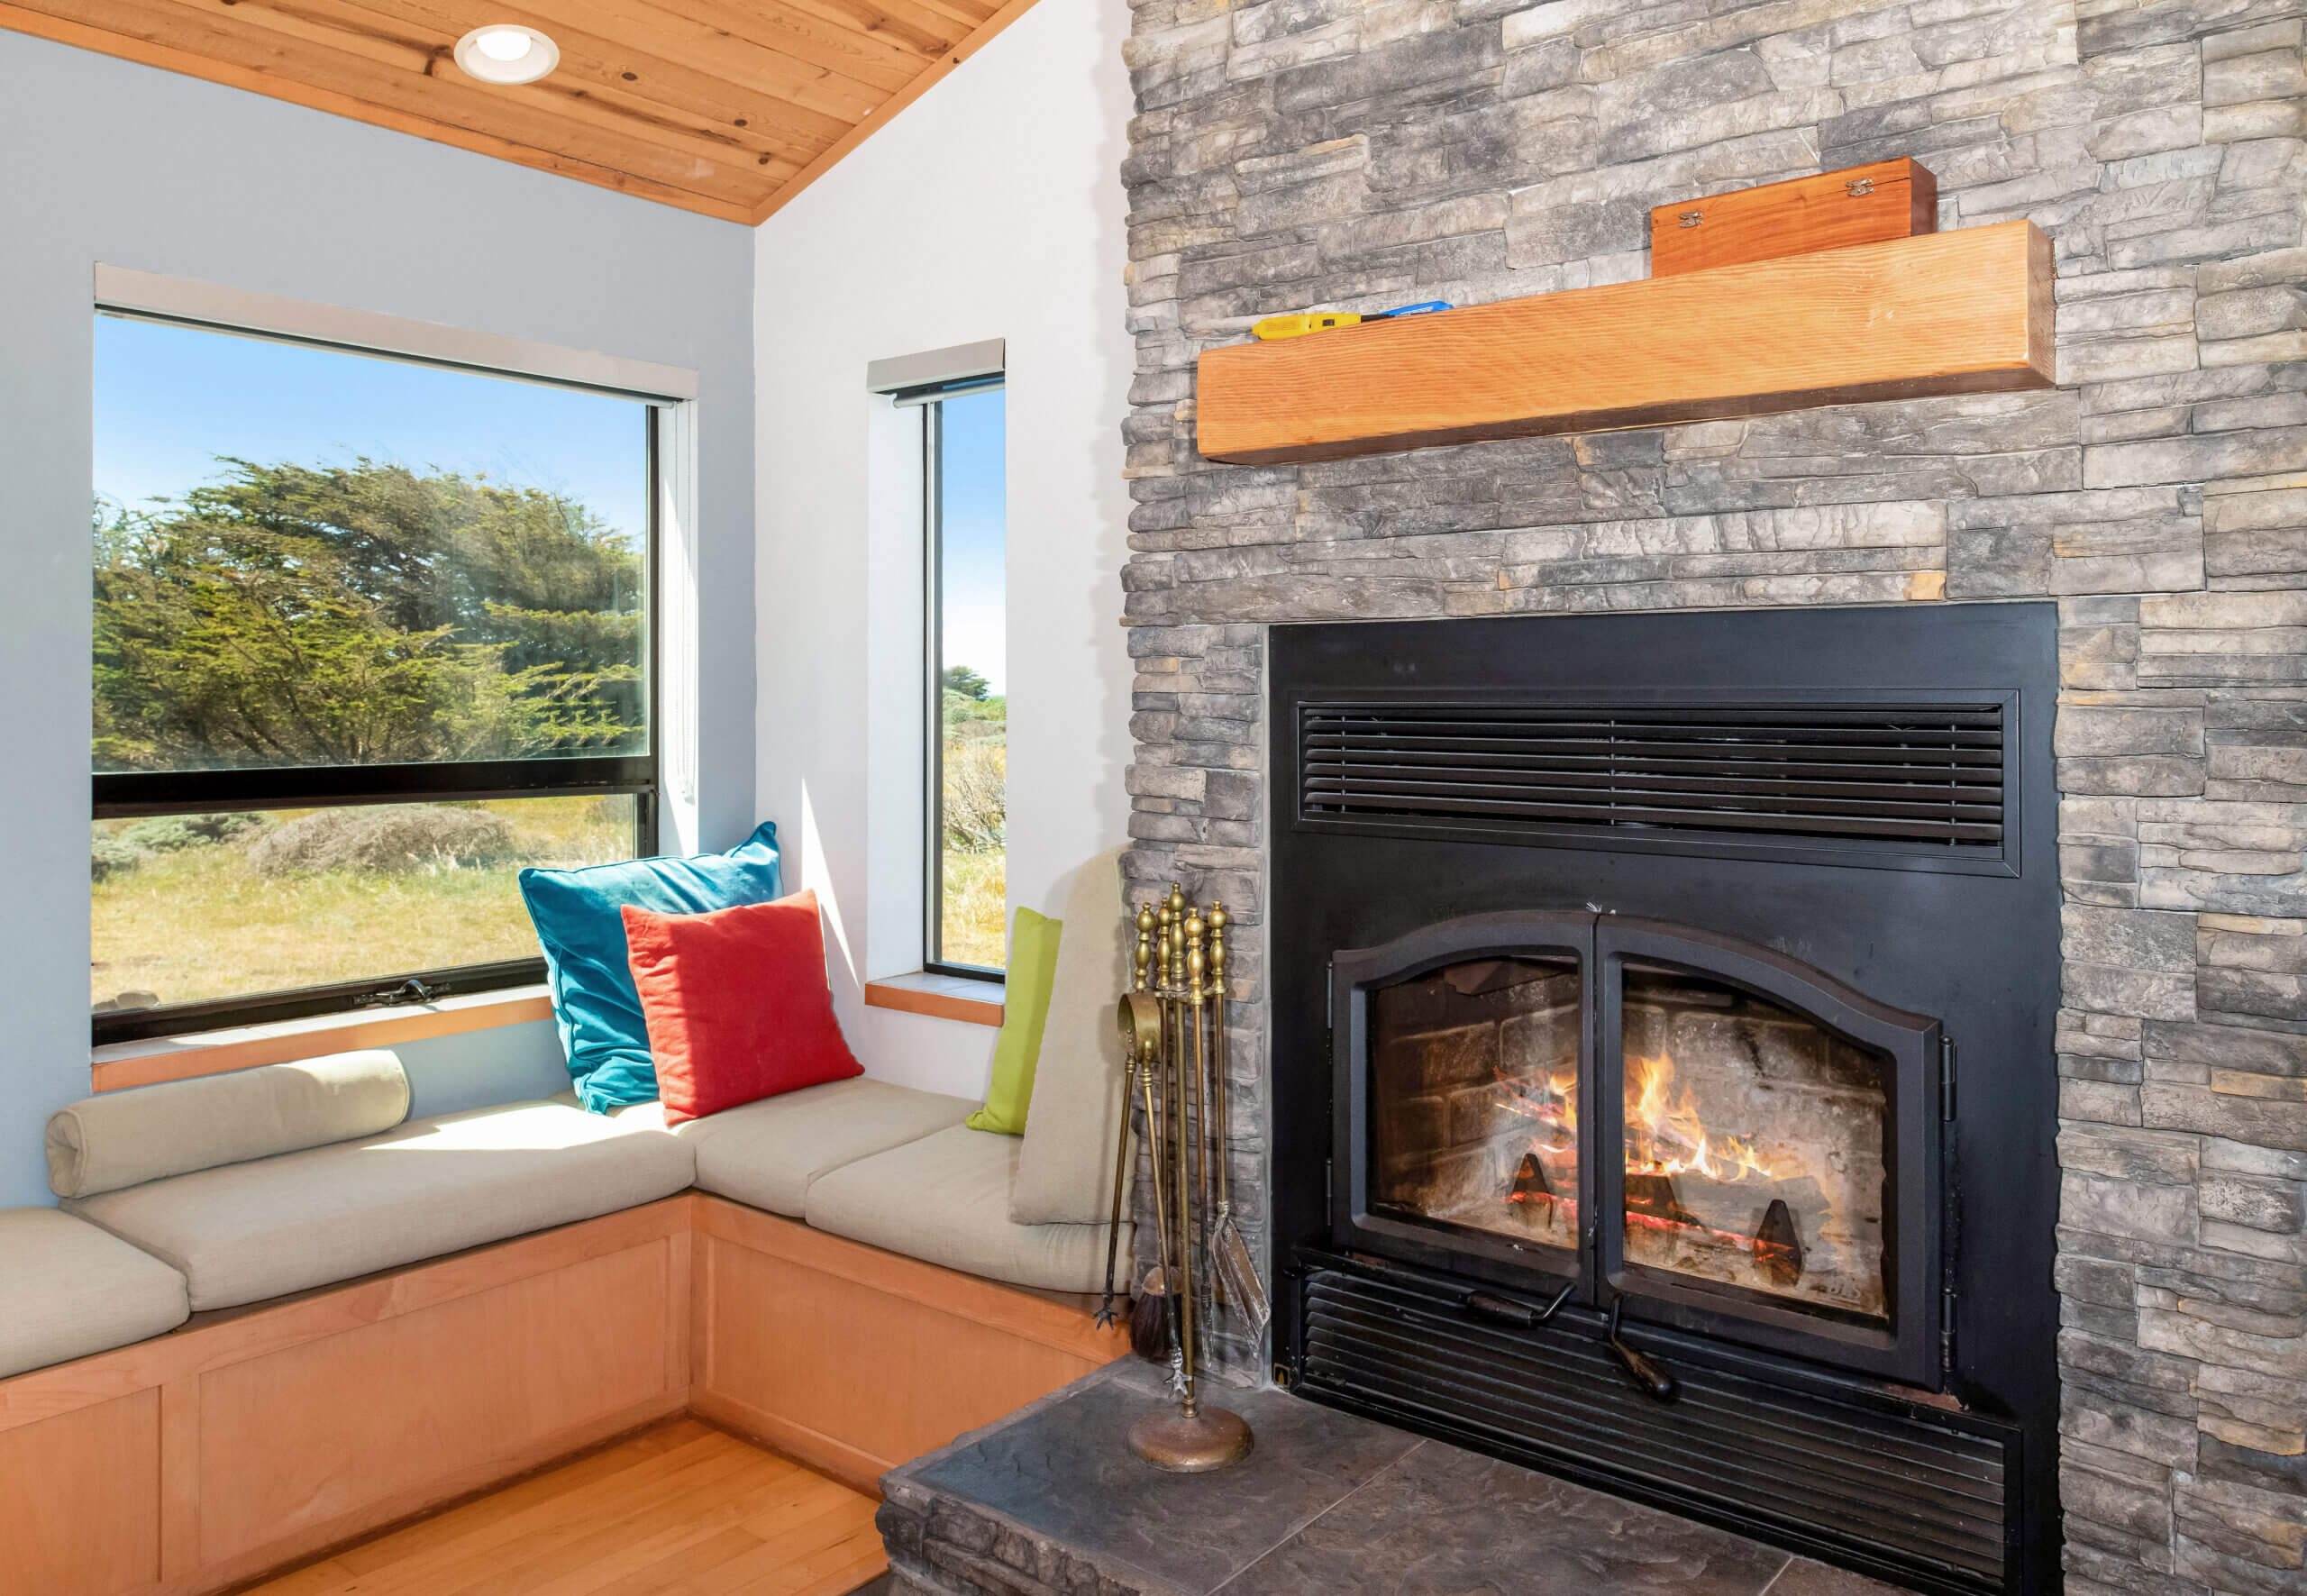 Bella Luna living room, fireplace, window seat with view of meadow